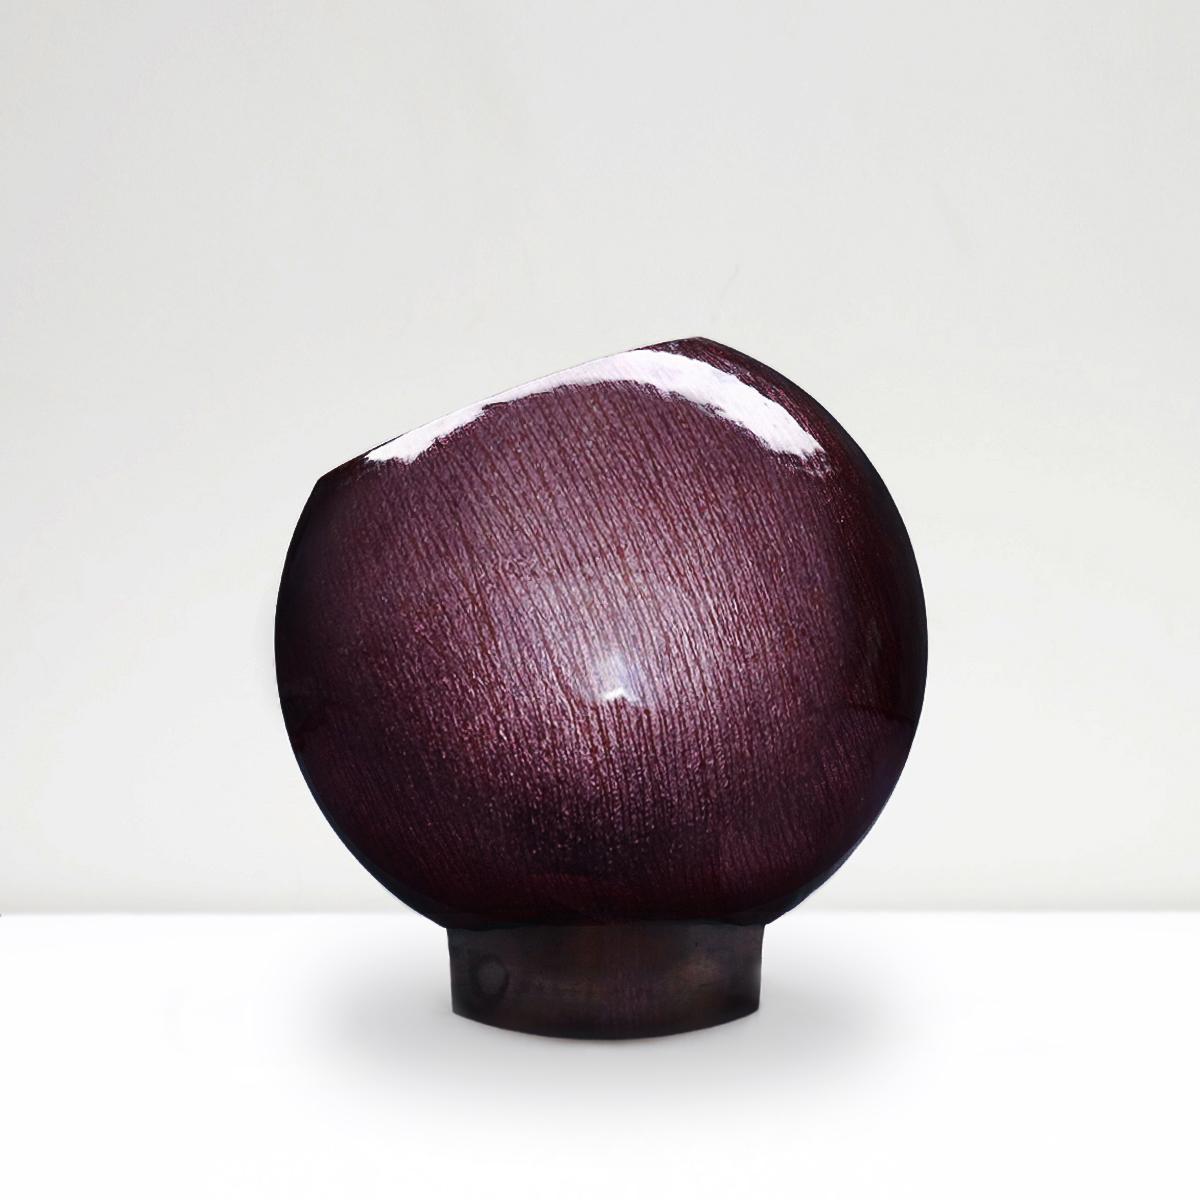 A truly rare and beautiful 1960’s vintage Italian Studio Del Campo Vintage bronze, glass and iridescent purple enamel spherical vase. 

The four future founders of Studio Del Campo began in studio glazing in the monastery of Ligugé in 1945 and in